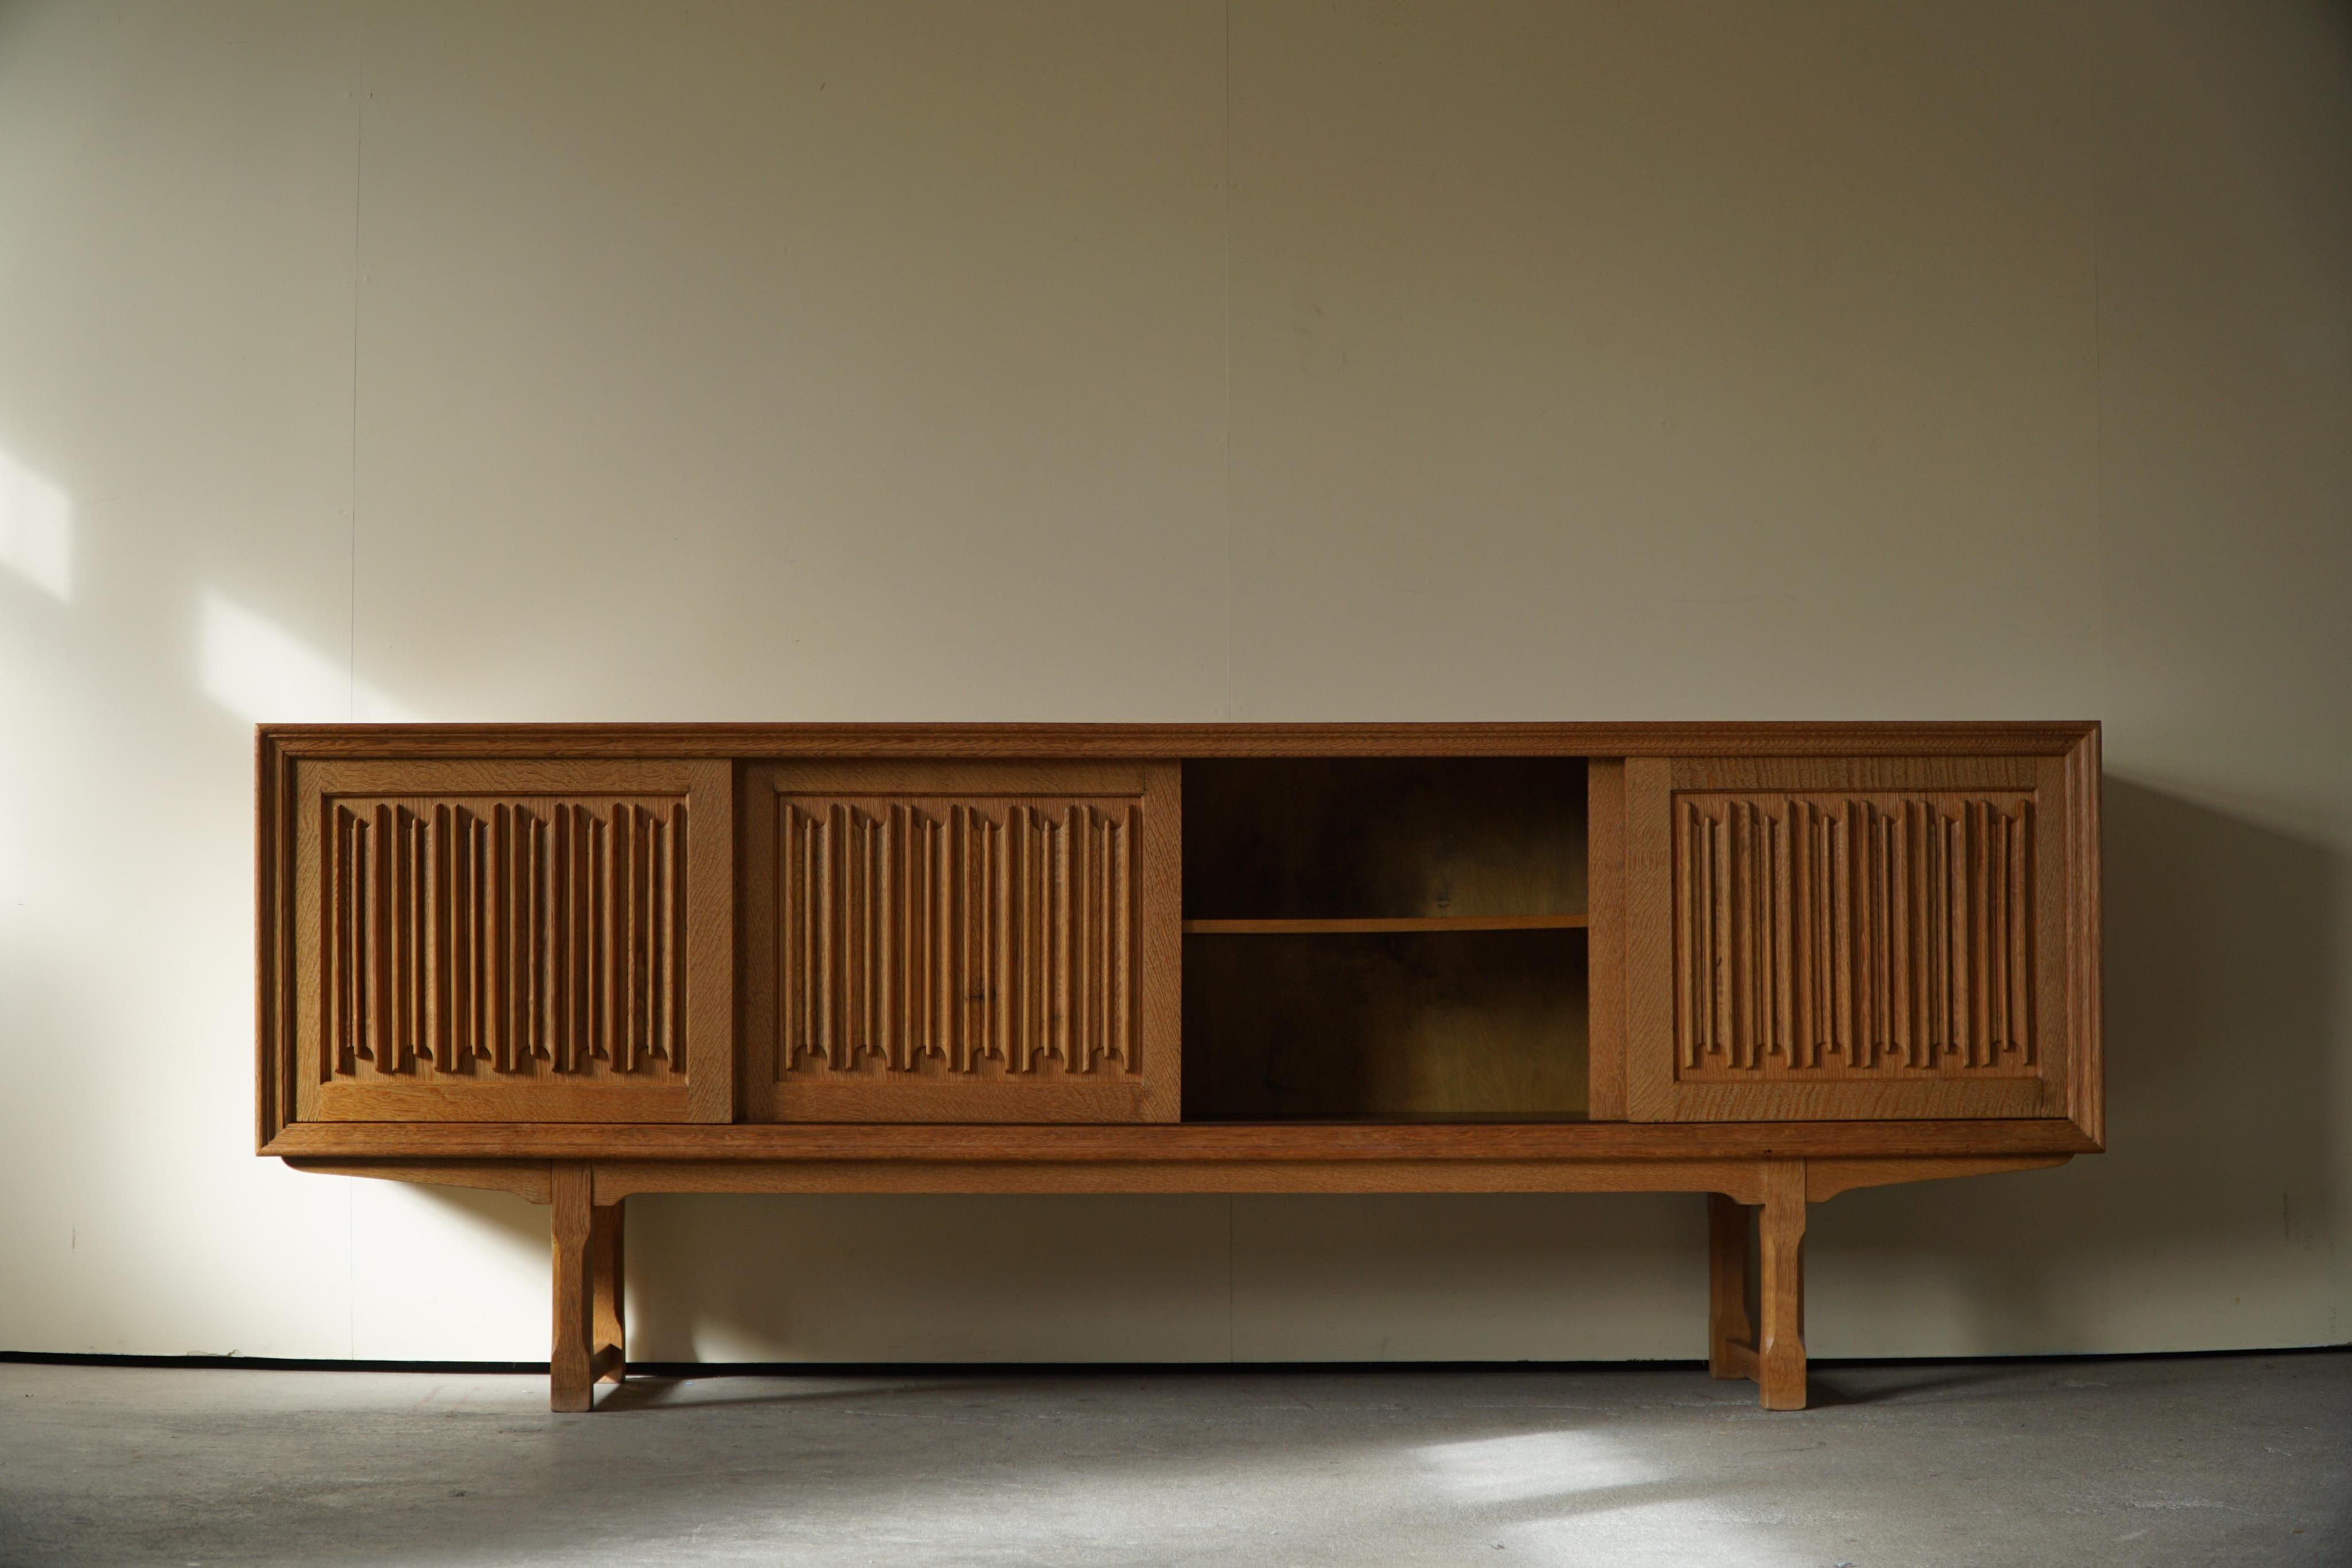 20th Century Midcentury Sculptural Sideboard in Oak, Made by a Danish Cabinetmaker, 1960s